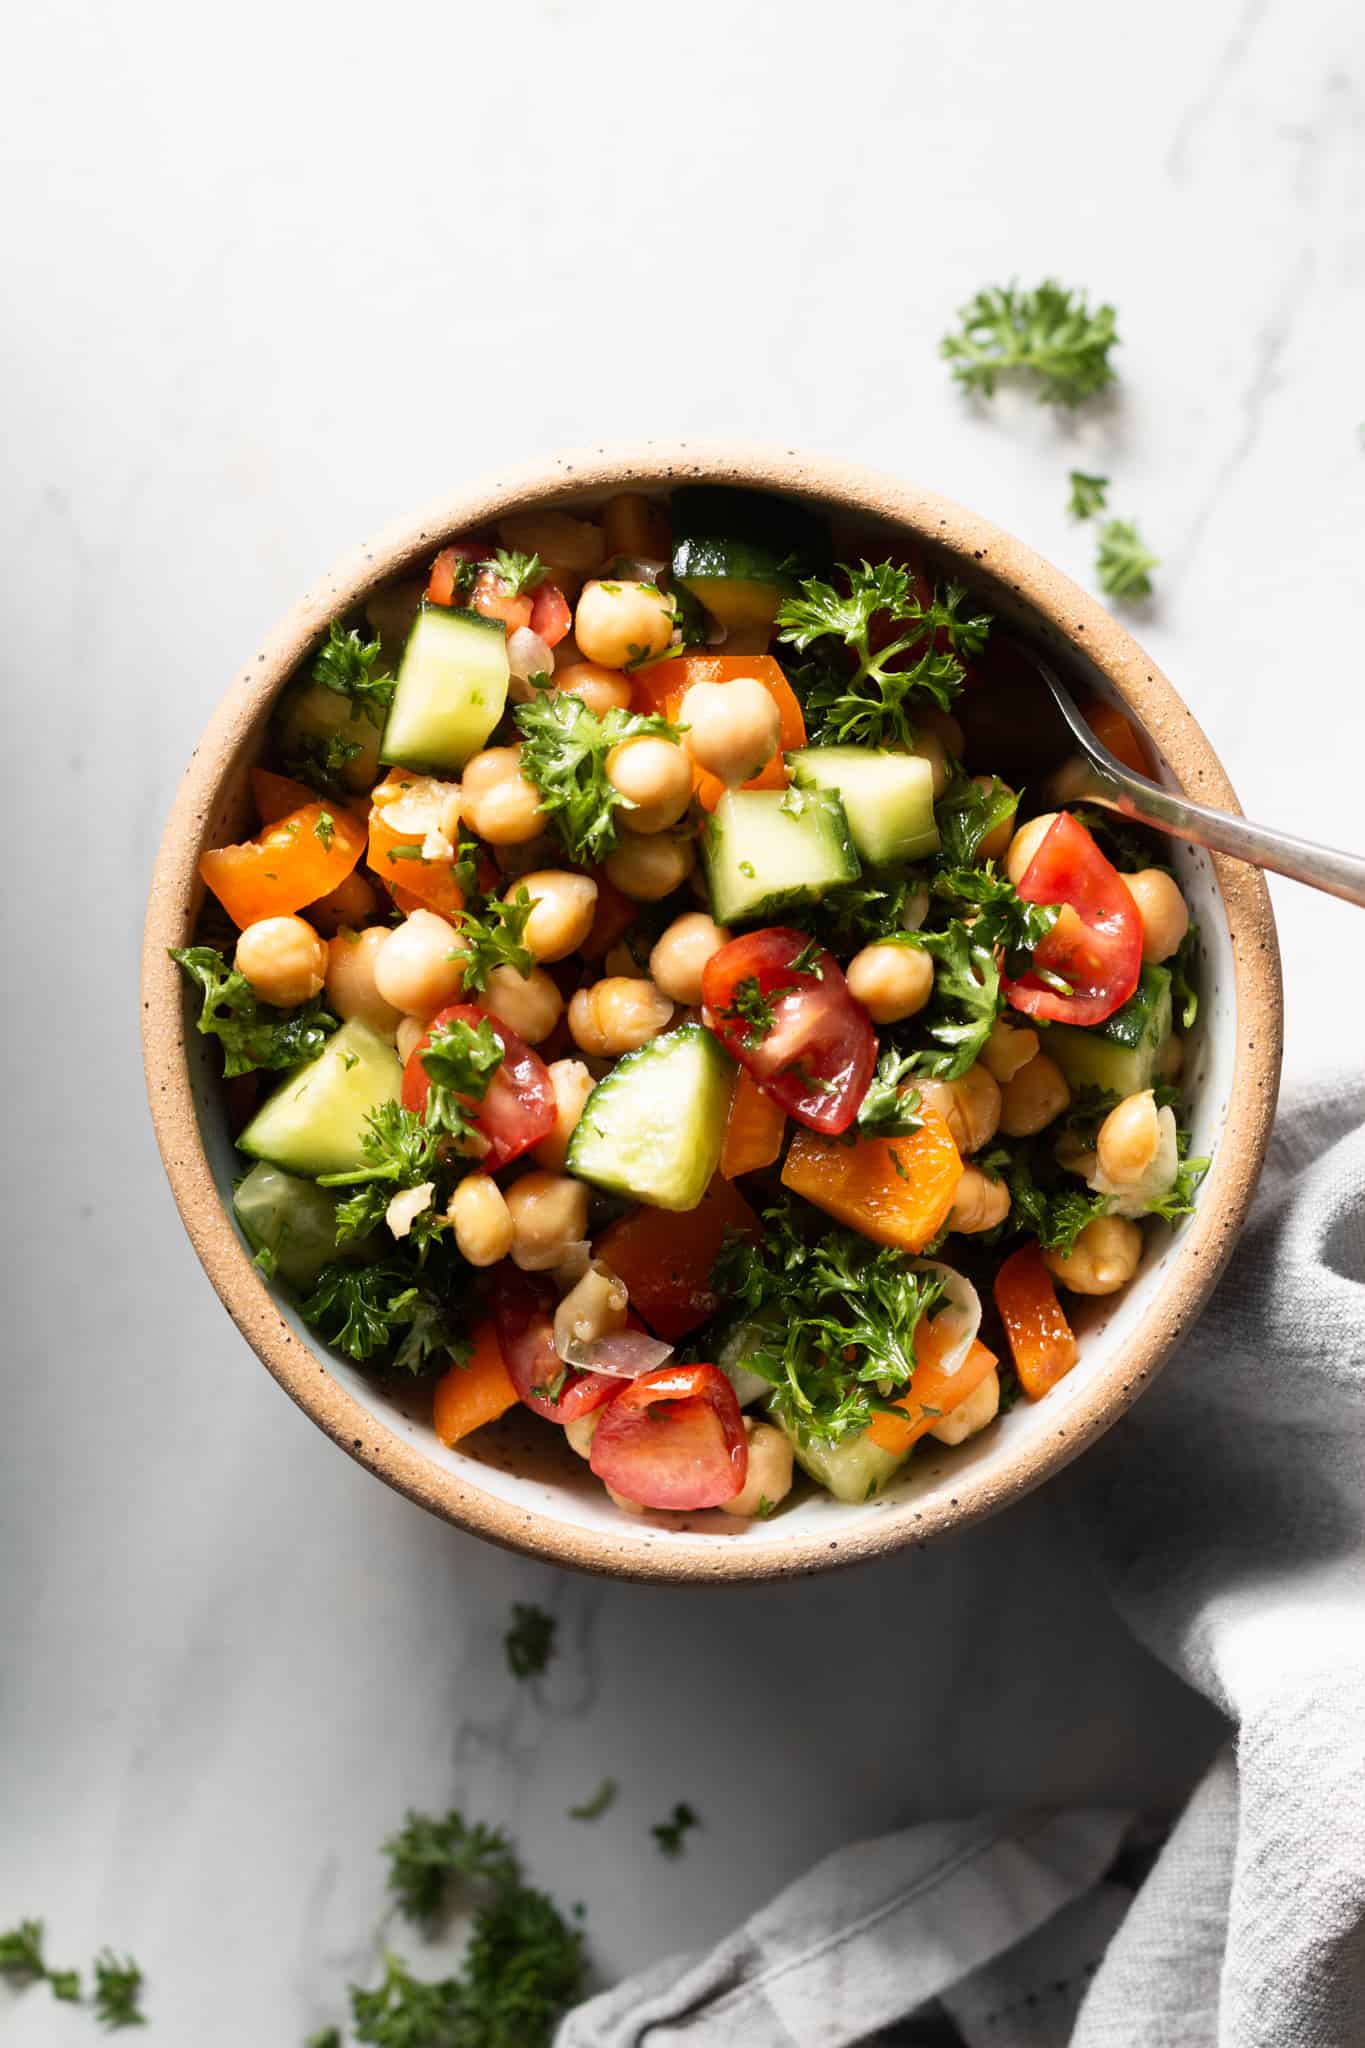 chickpea salad - 132 vegan recipes to start the new year